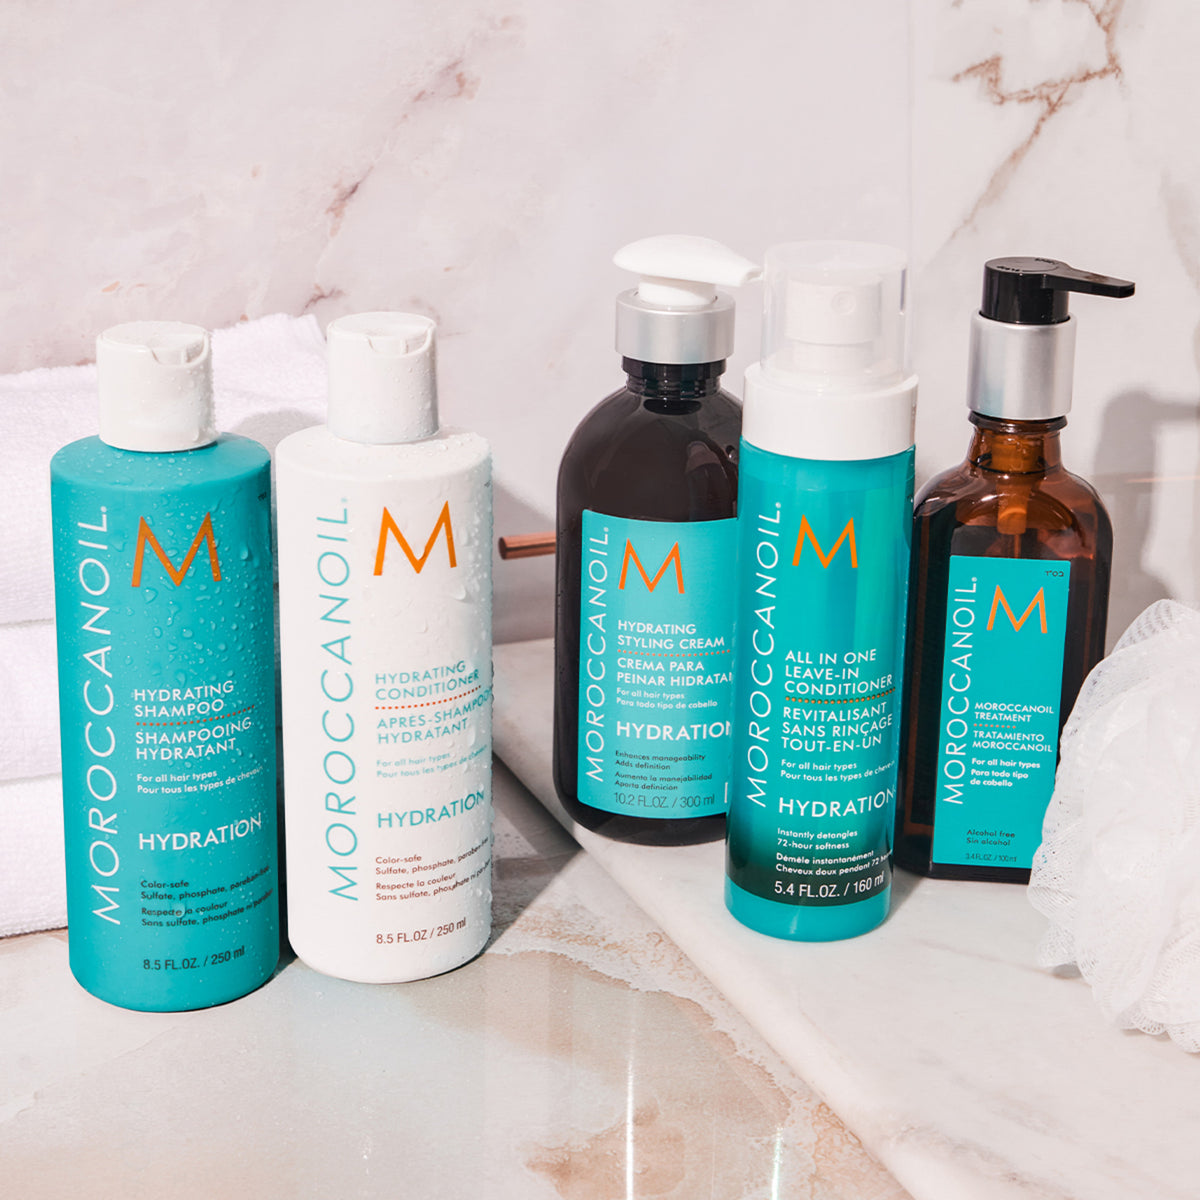 Moroccanoil All In One Leave-In Conditioner .